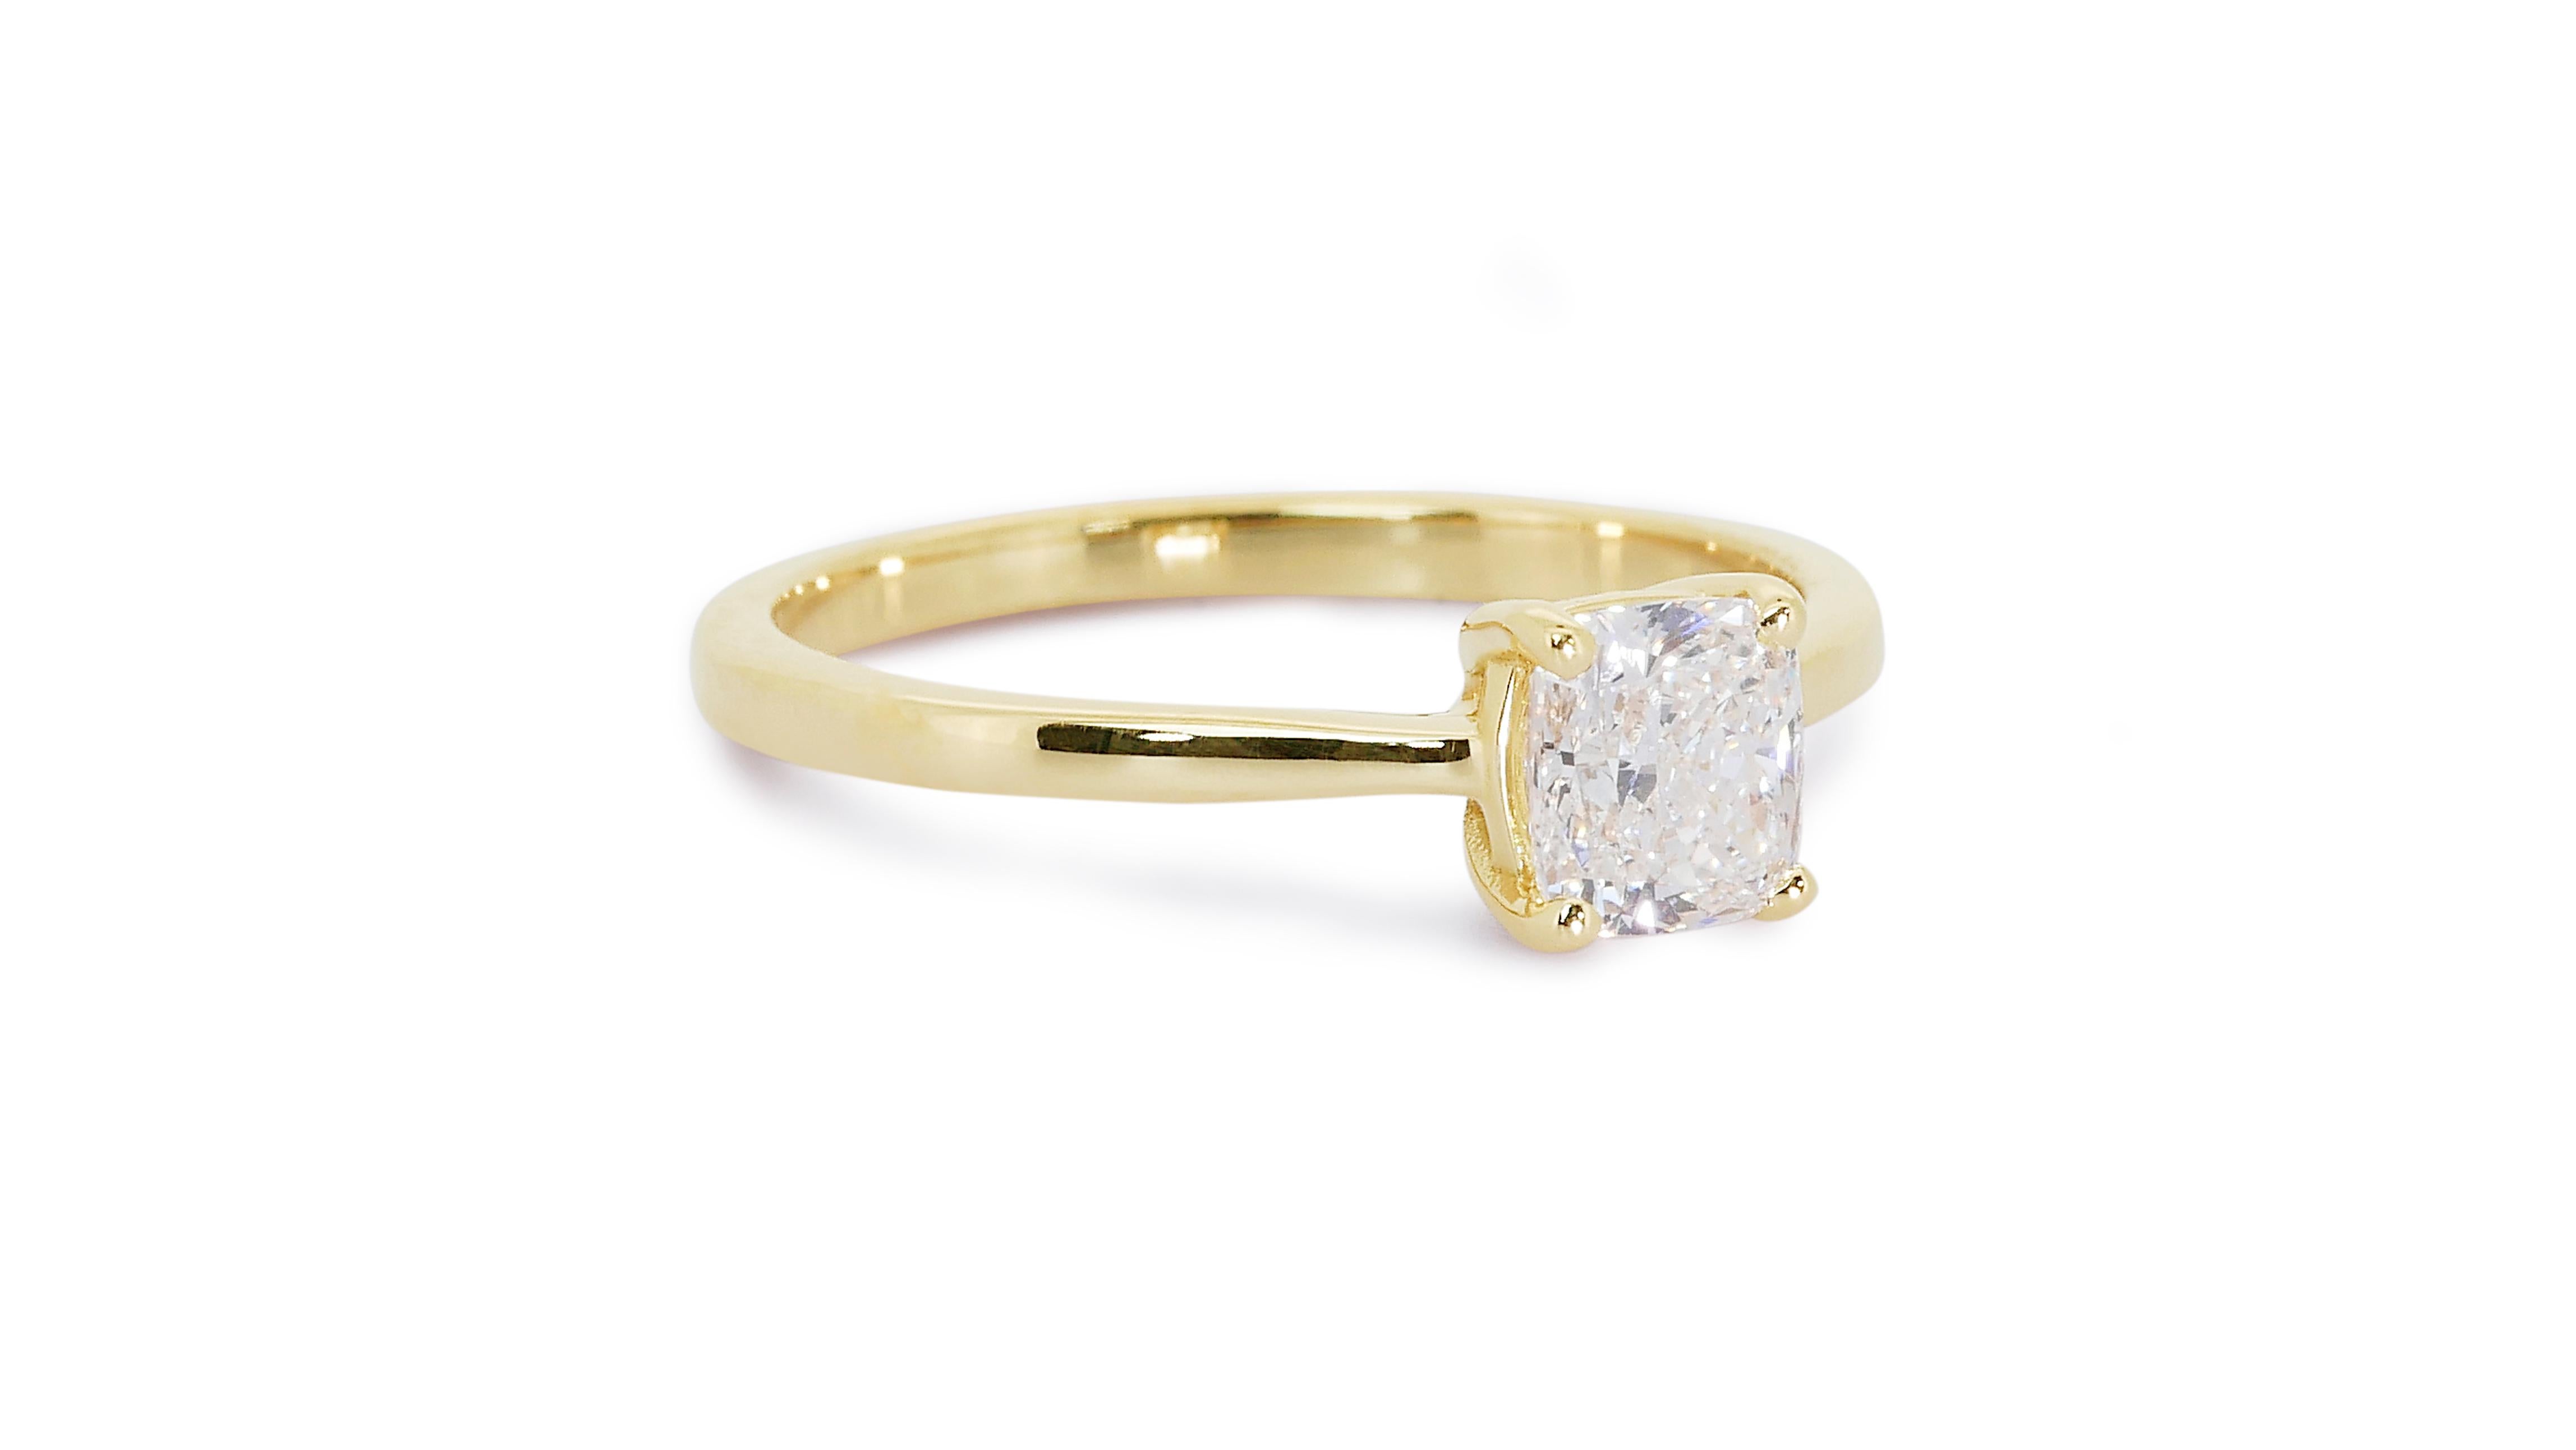 Glamorous 18k Yellow Gold Solitaire Ring w/ 0.80 ct Natural Diamonds IGI Cert For Sale 1